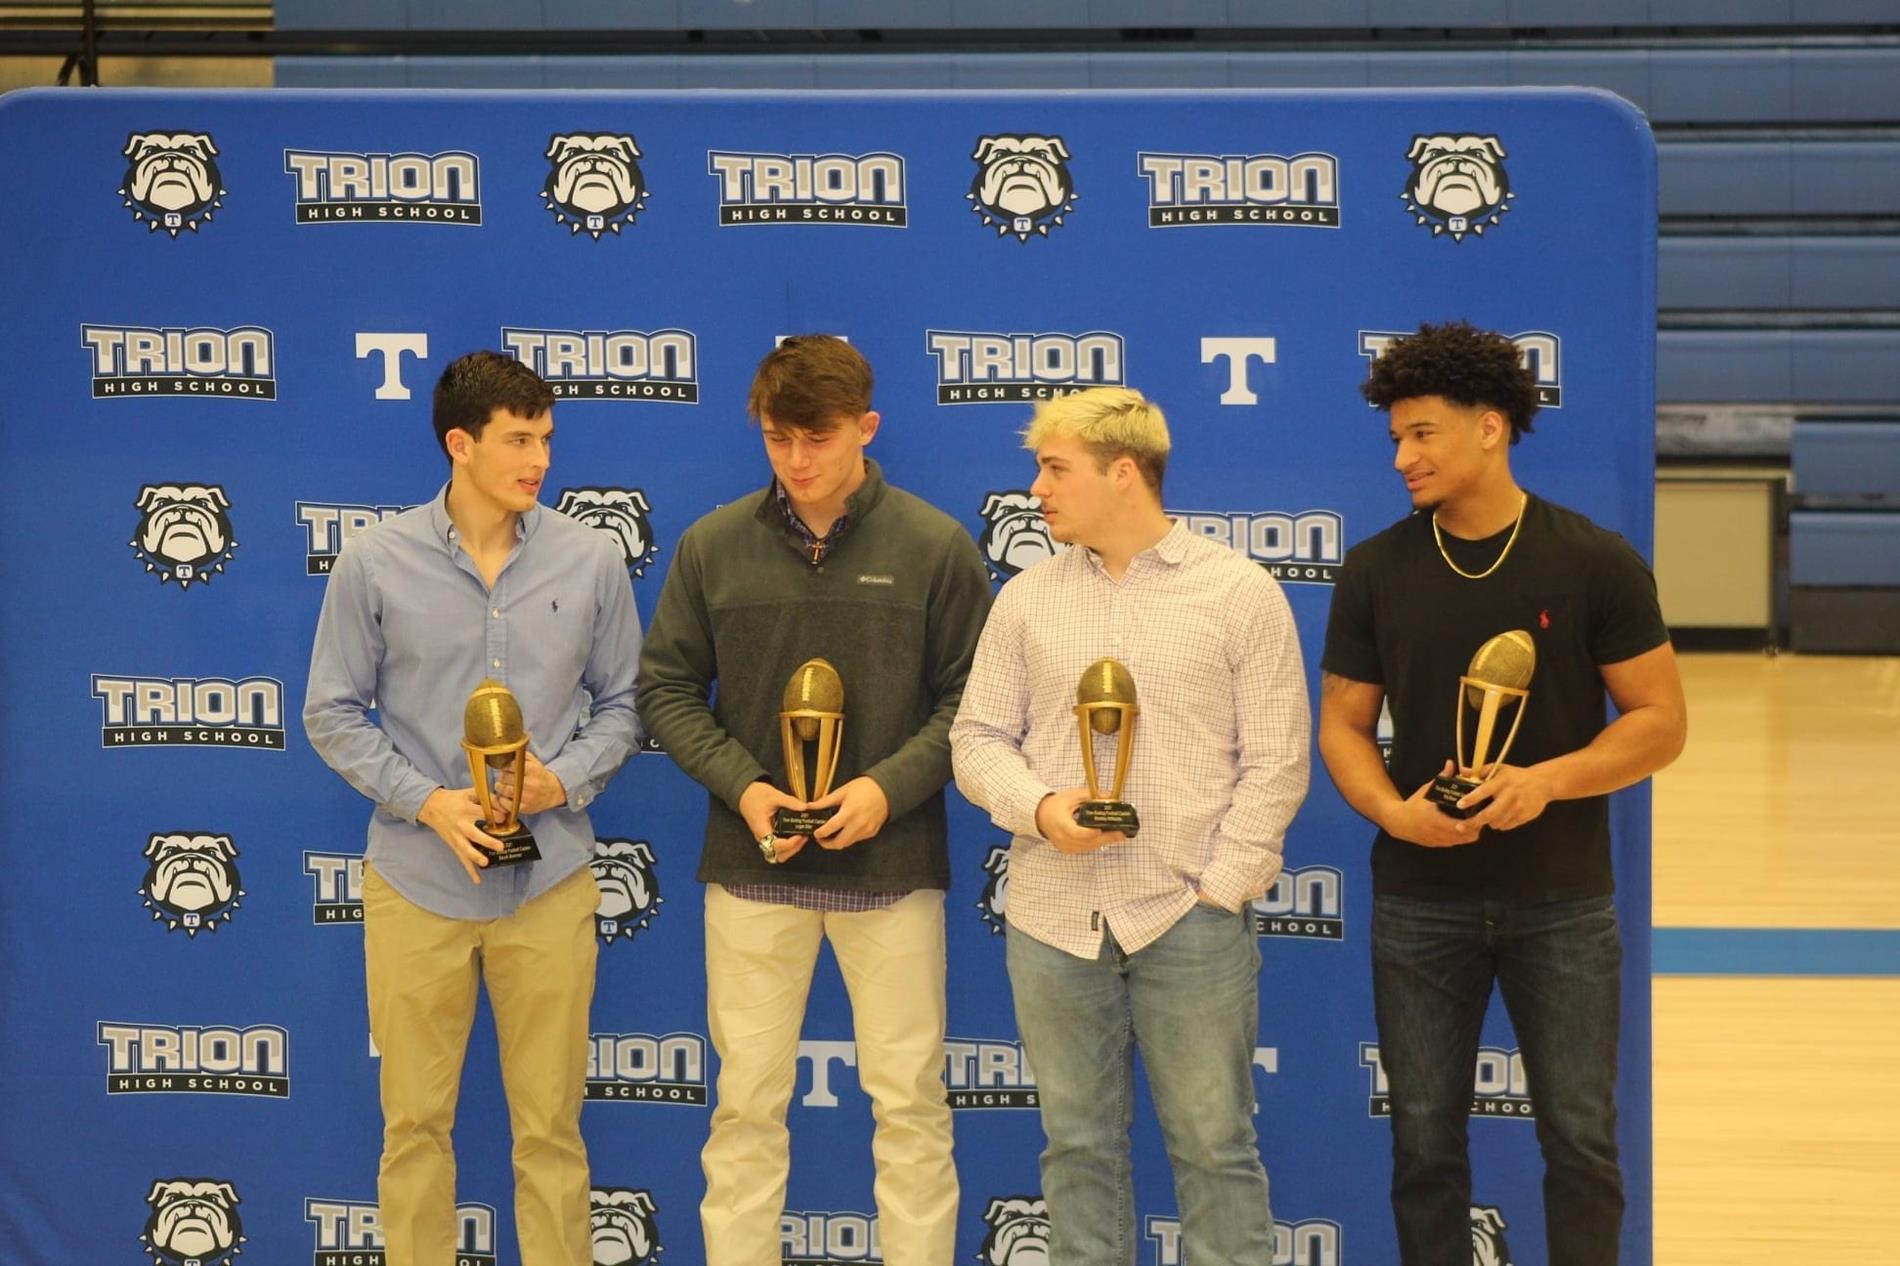 Football Banquet and Awards are Presented